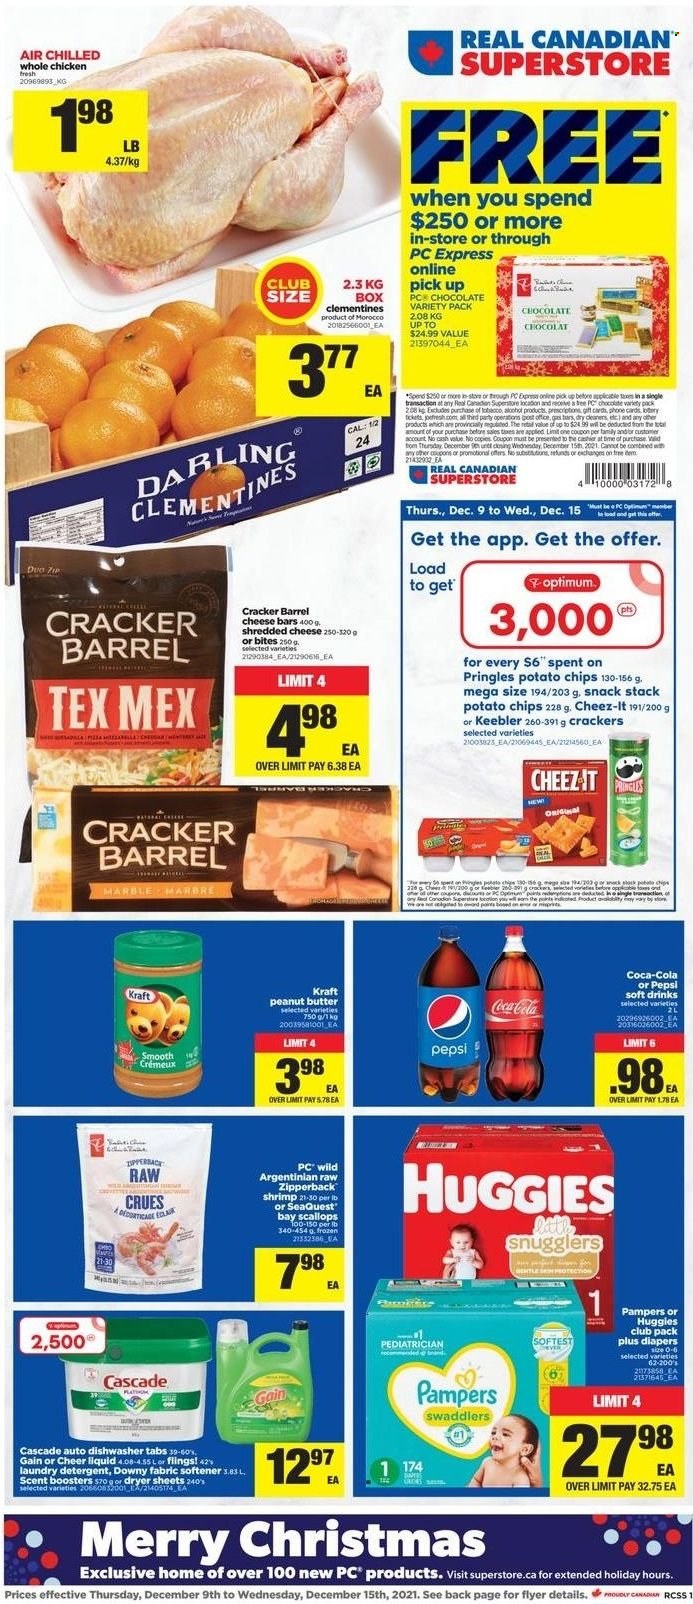 thumbnail - Real Canadian Superstore Flyer - December 09, 2021 - December 15, 2021 - Sales products - clementines, scallops, shrimps, Kraft®, shredded cheese, chocolate, snack, crackers, Keebler, potato chips, Pringles, Cheez-It, peanut butter, Coca-Cola, Pepsi, soft drink, L'Or, whole chicken, chicken, nappies, Gain, fabric softener, laundry detergent, Cascade, dryer sheets, scent booster, Downy Laundry, pot, Optimum, detergent, Huggies, Pampers. Page 1.